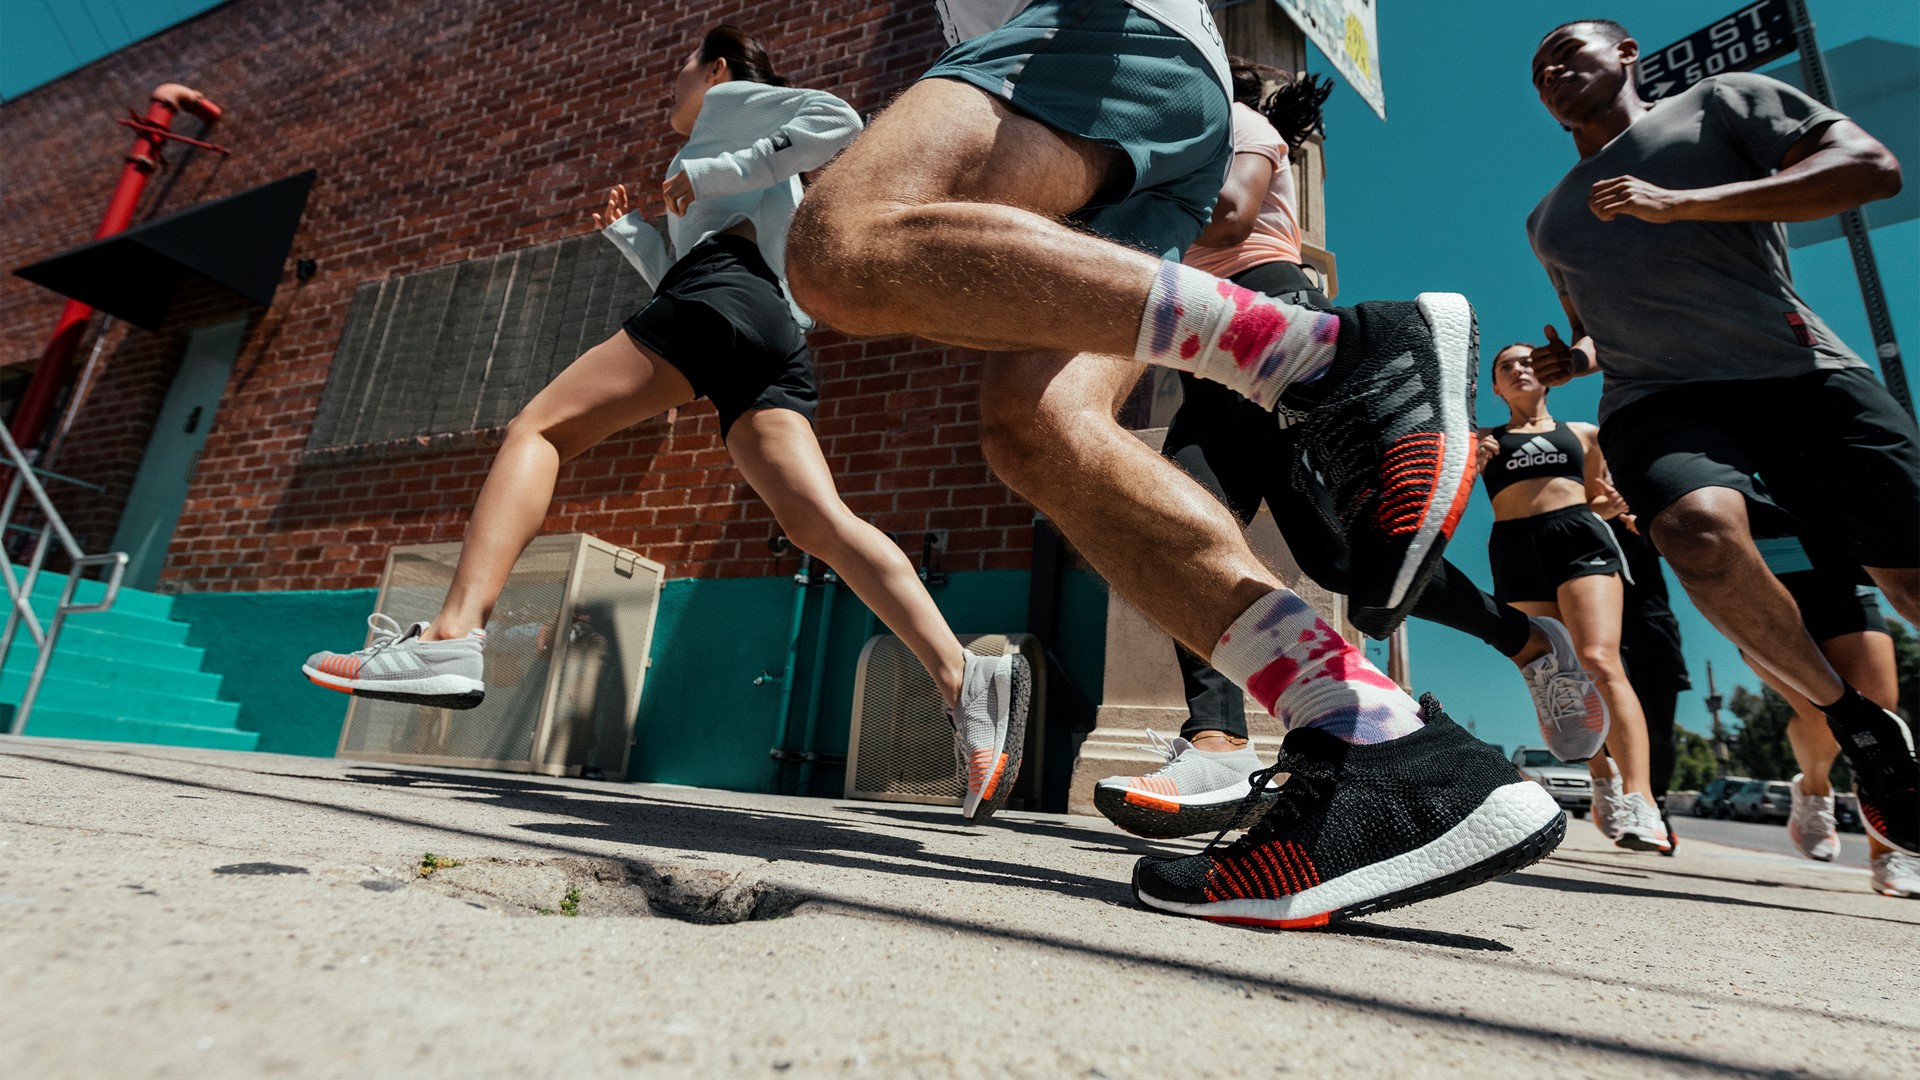 Hesitate spontaneous Great oak adidas Creates a New Boost Innovation for Urban Runners: PulseBoost HD